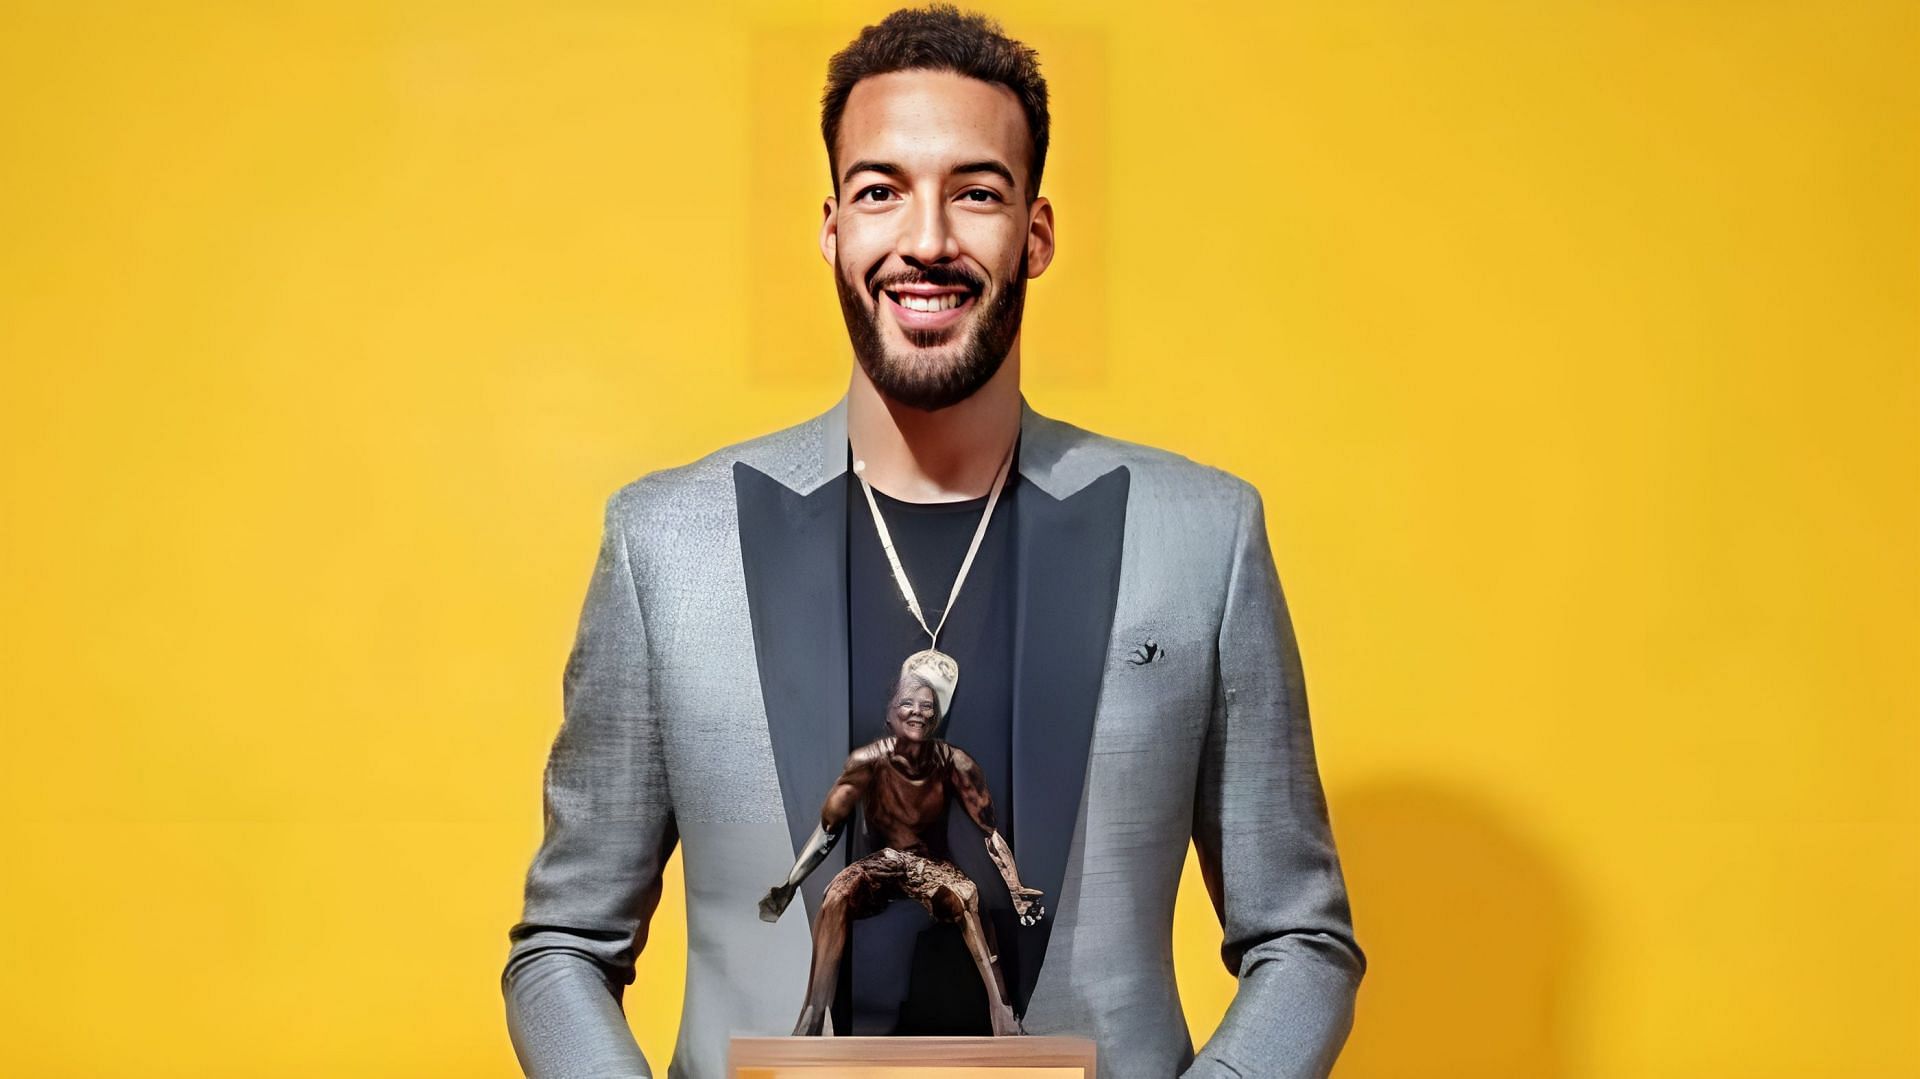 Former Utah Jazz star center Rudy Gobert holding one of his DPOTY trophies